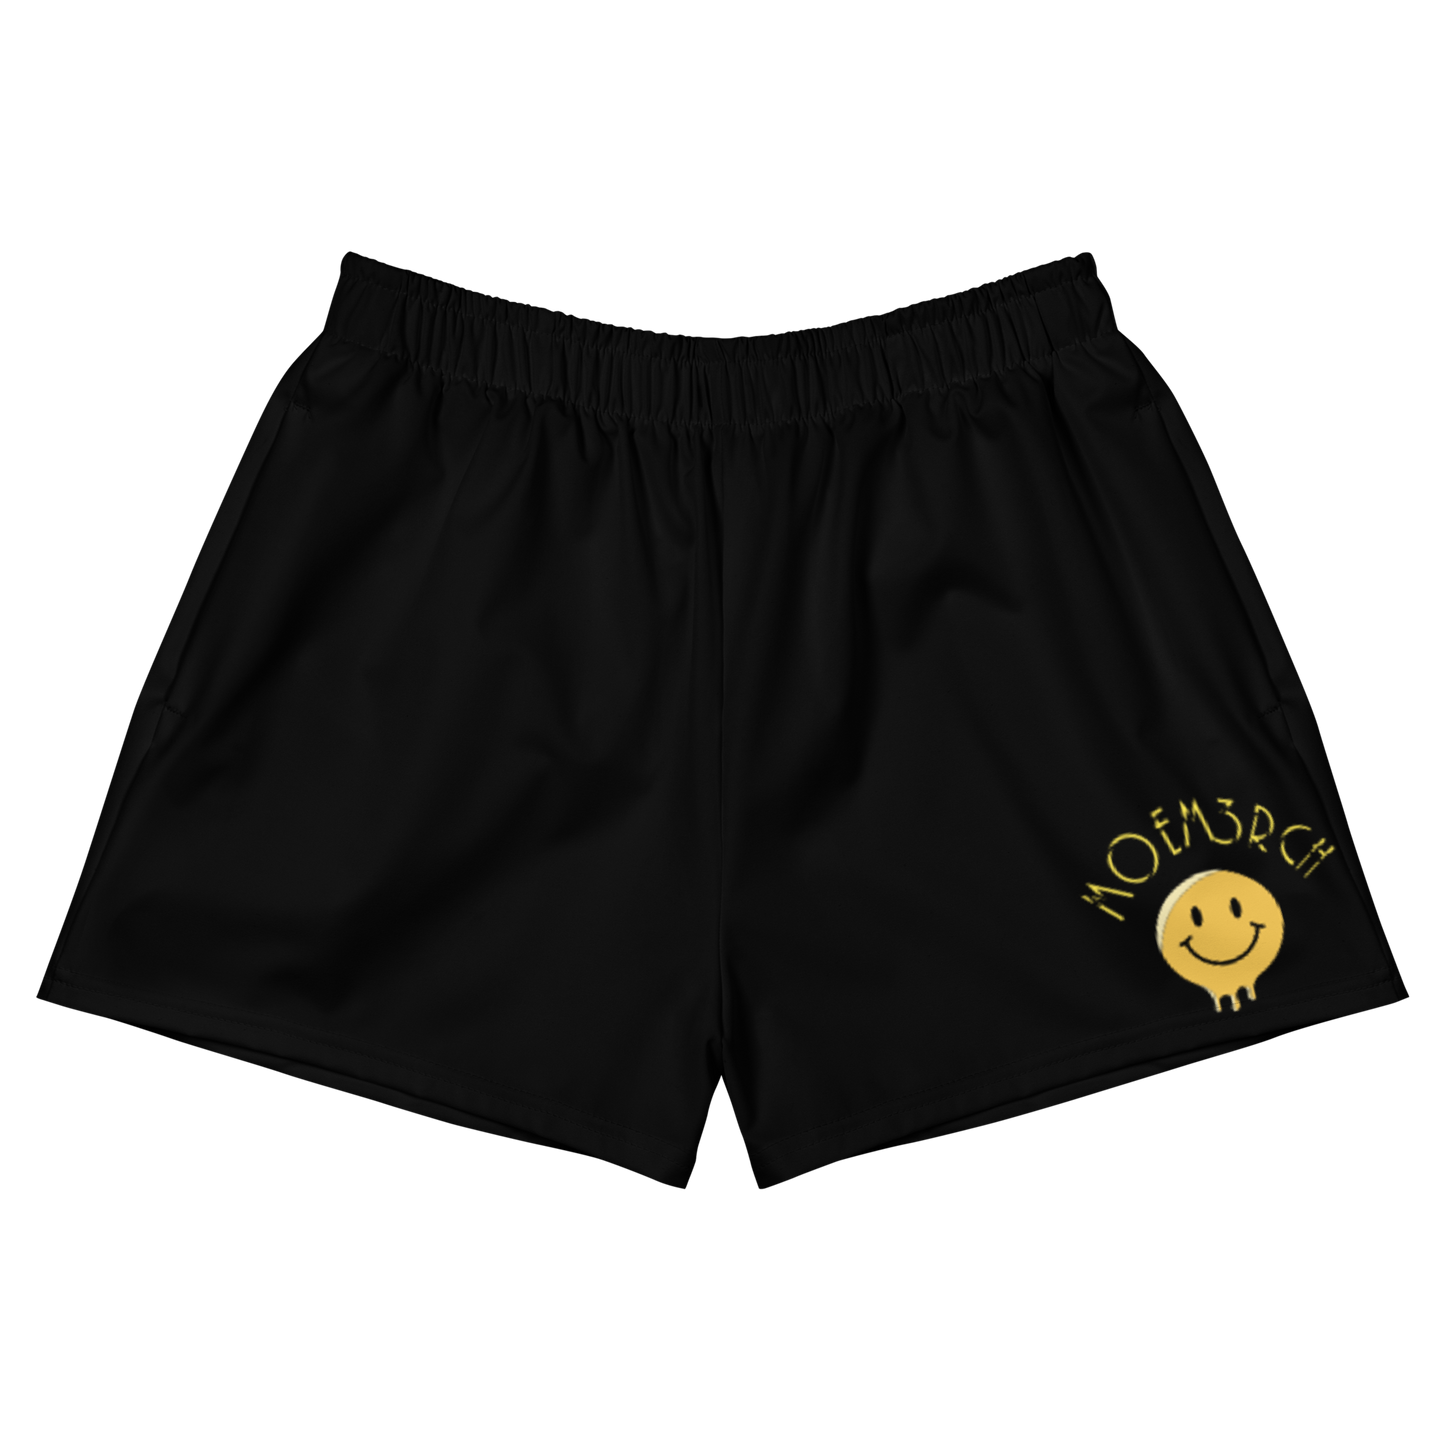 MoeM3rch - Women’s Recycled Athletic Shorts